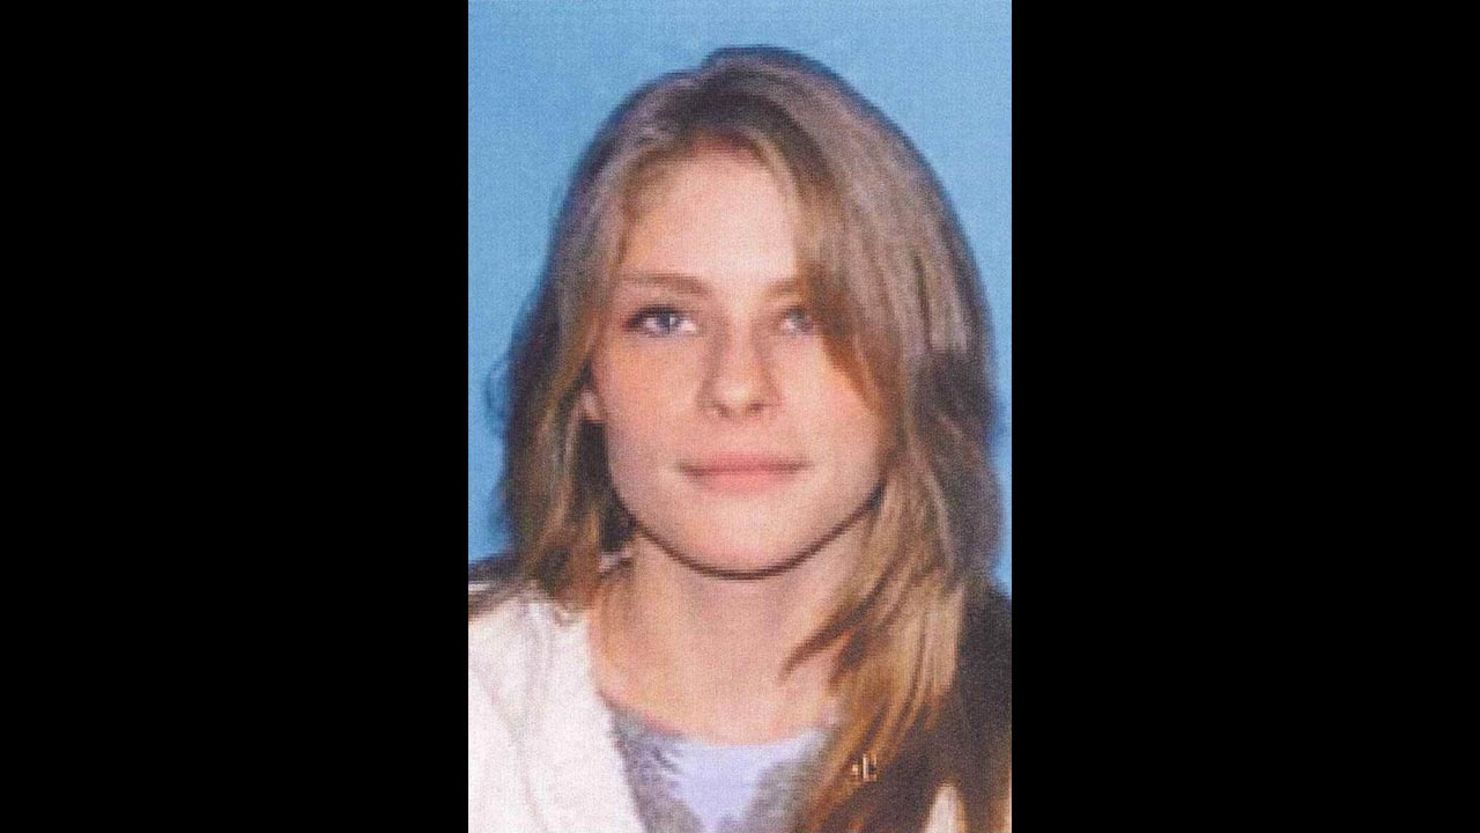 Jessica Heeringa was last seen shortly before 11 p.m. Friday at the gas station where she worked.